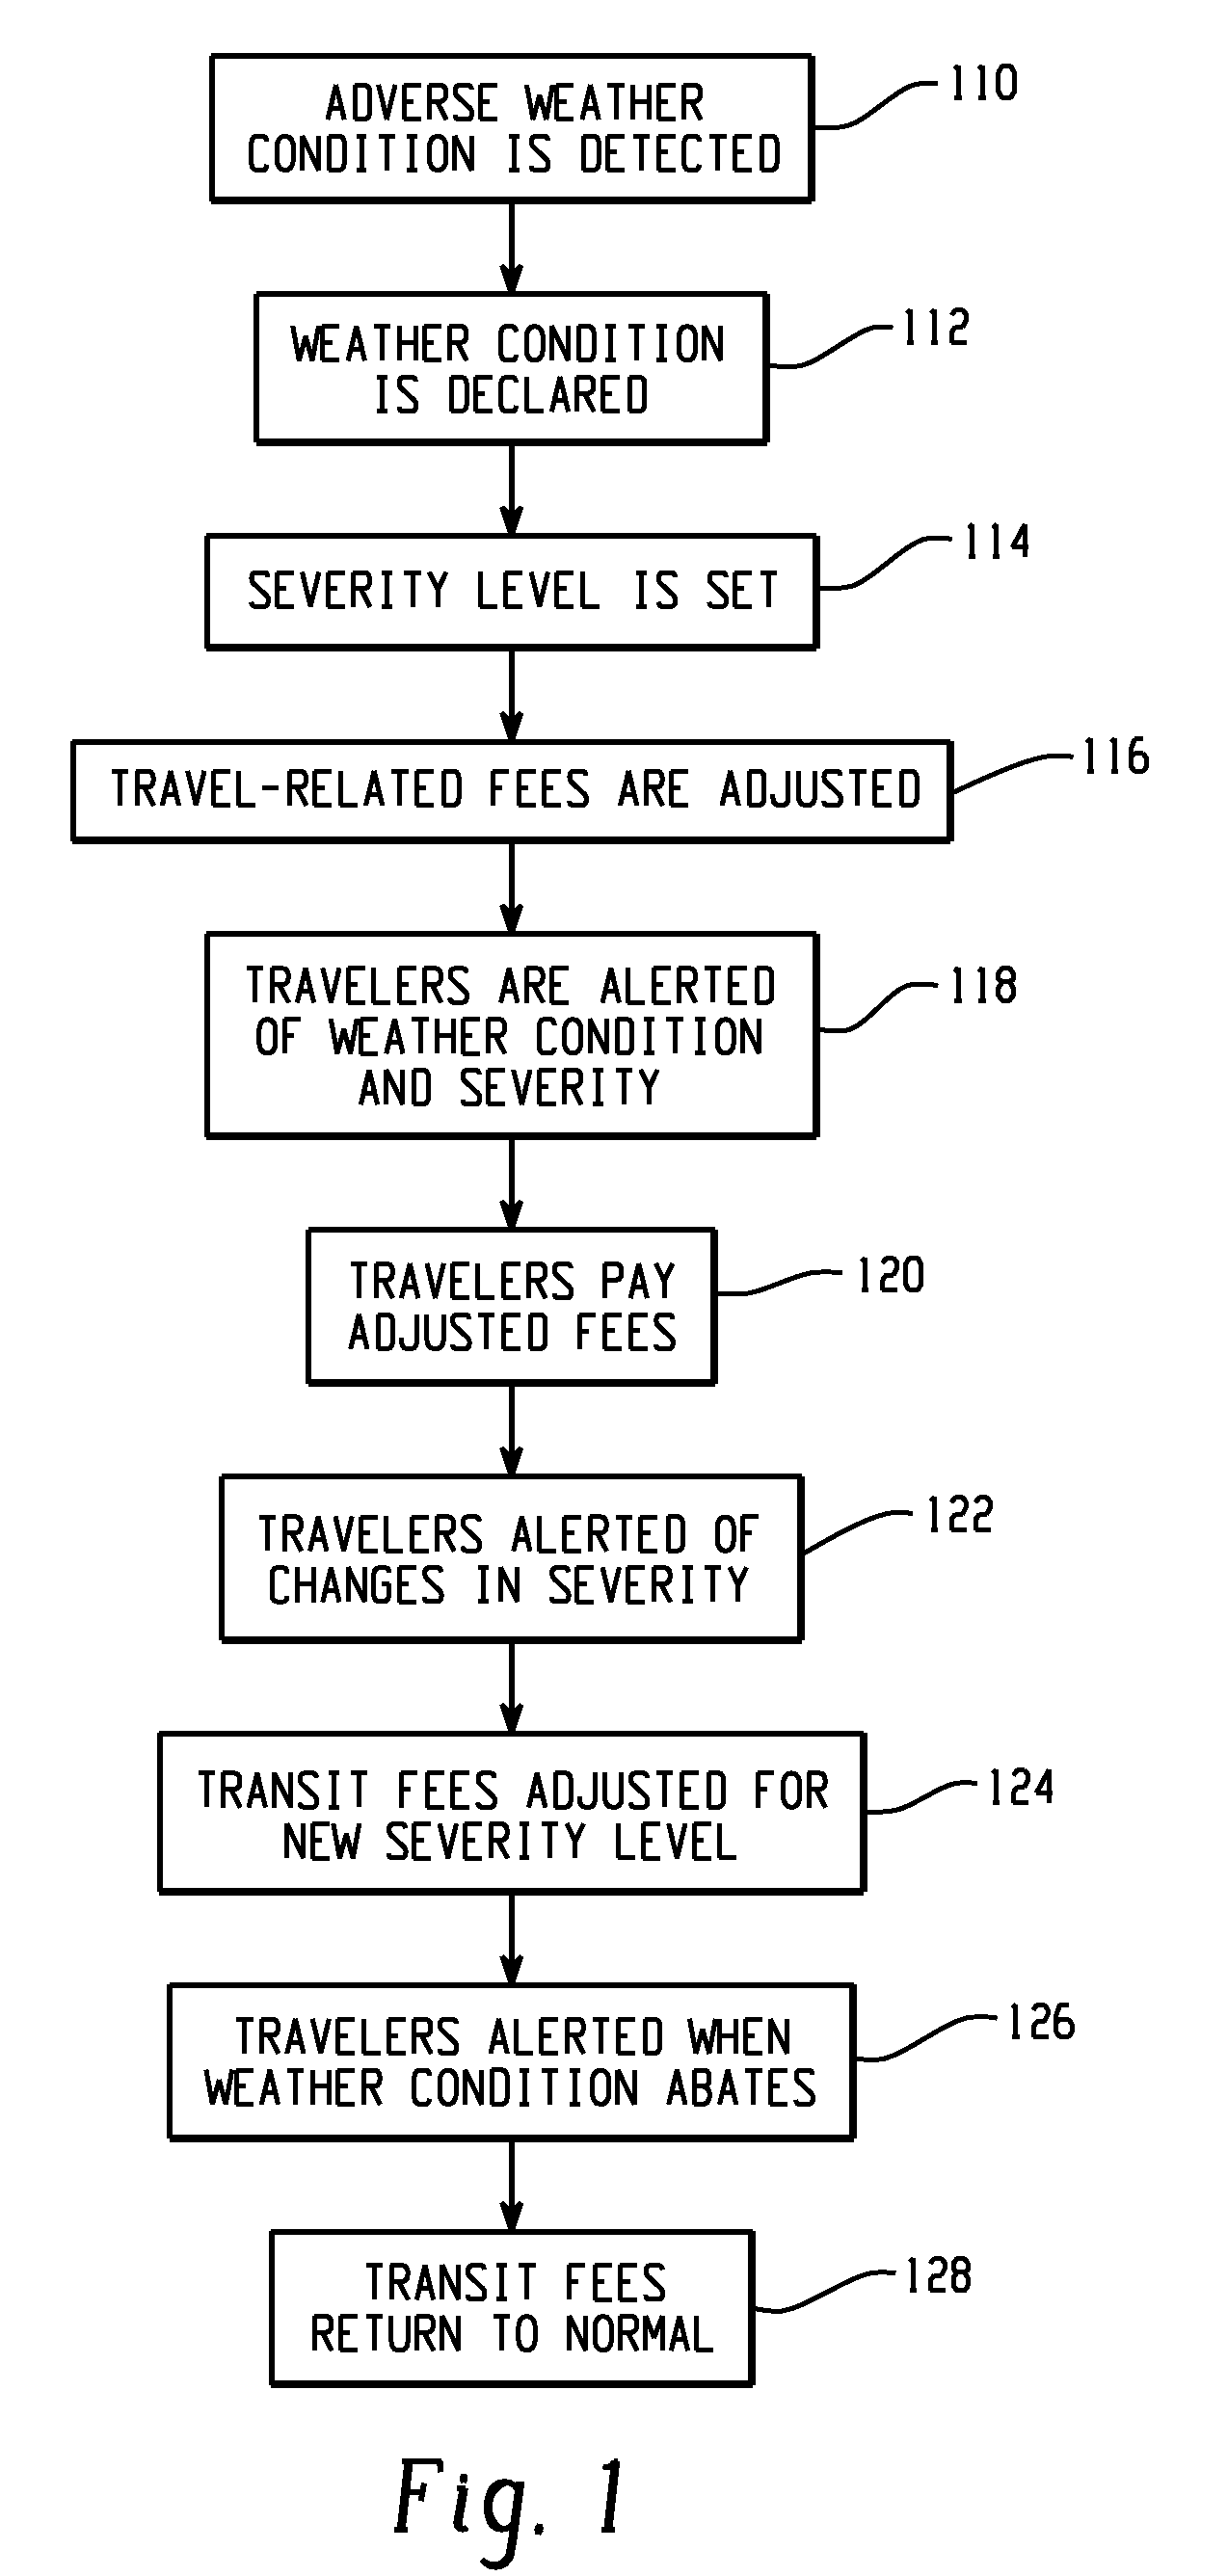 Variable-rate transport fees based on hazardous travel conditions